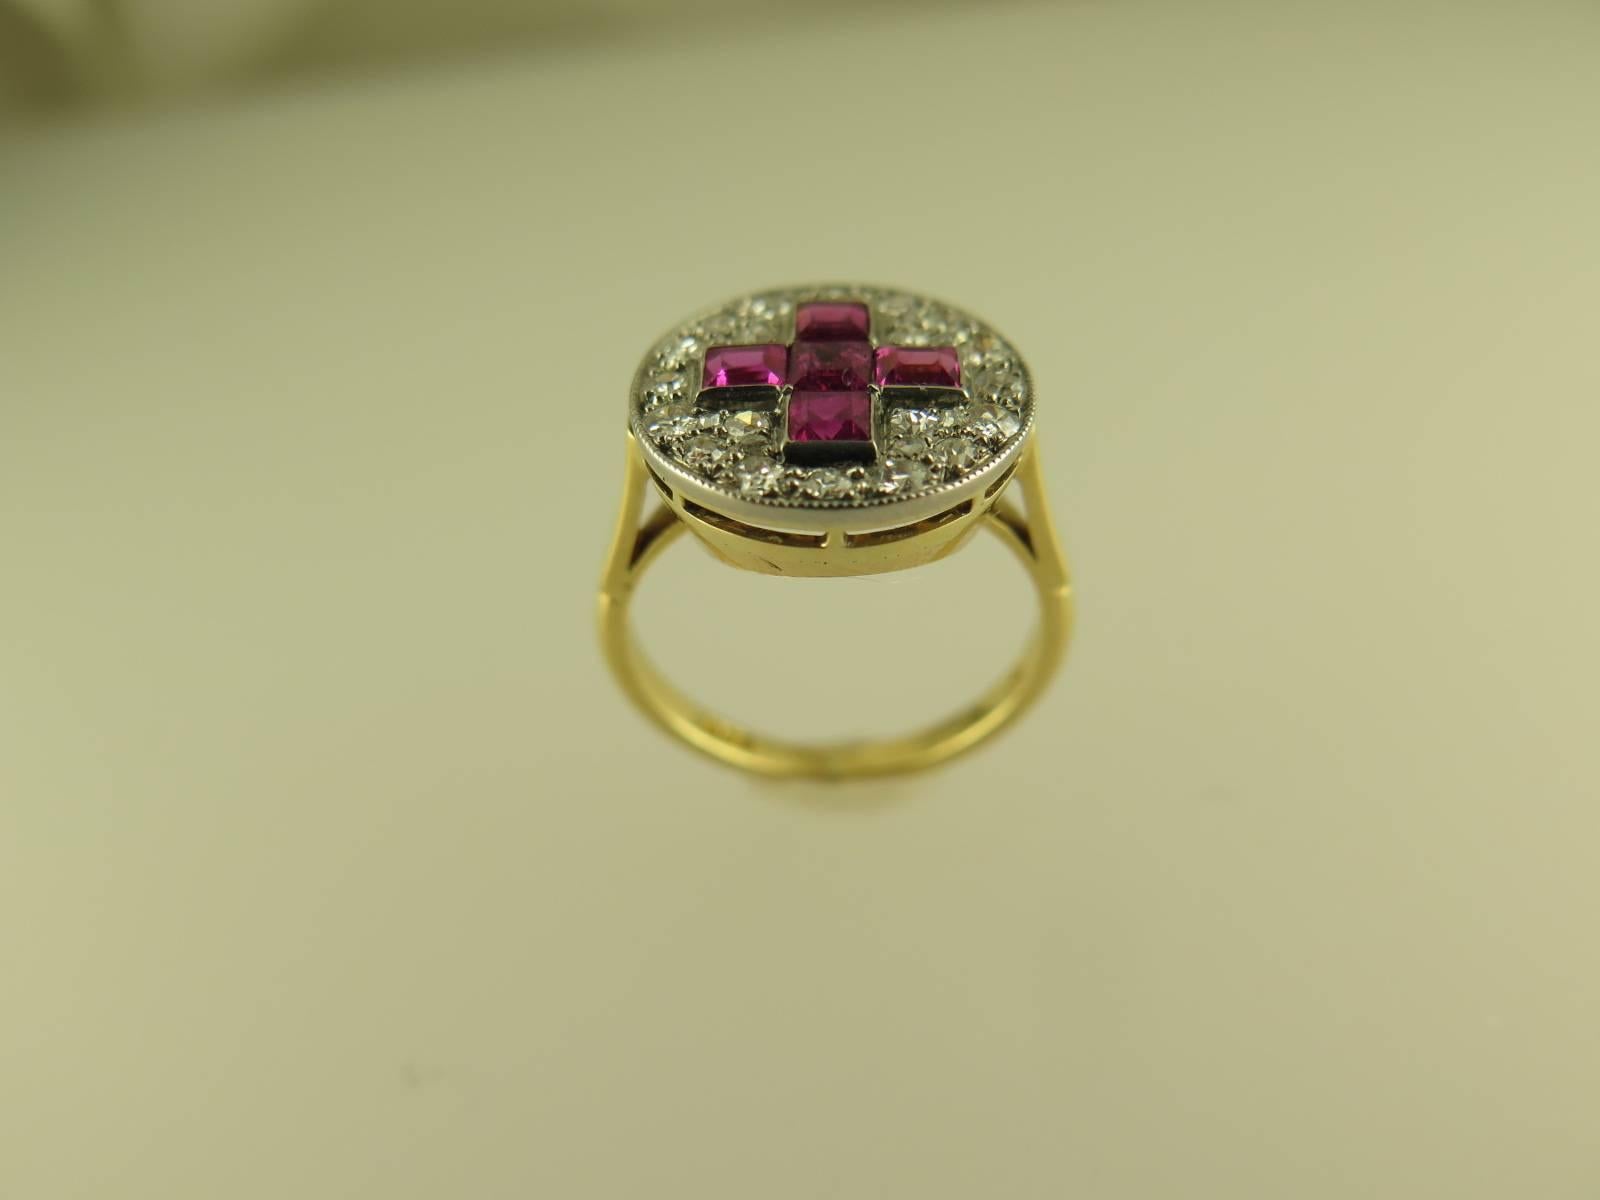 The circular panel pavé-set with approximately 0.85cts of single-cut diamonds and set to the centre with a calibré-cut ruby Greek cross motif, all within a millegrain border, to a plain 18ct yellow gold shank, size J (US size 5), sizeable to order 